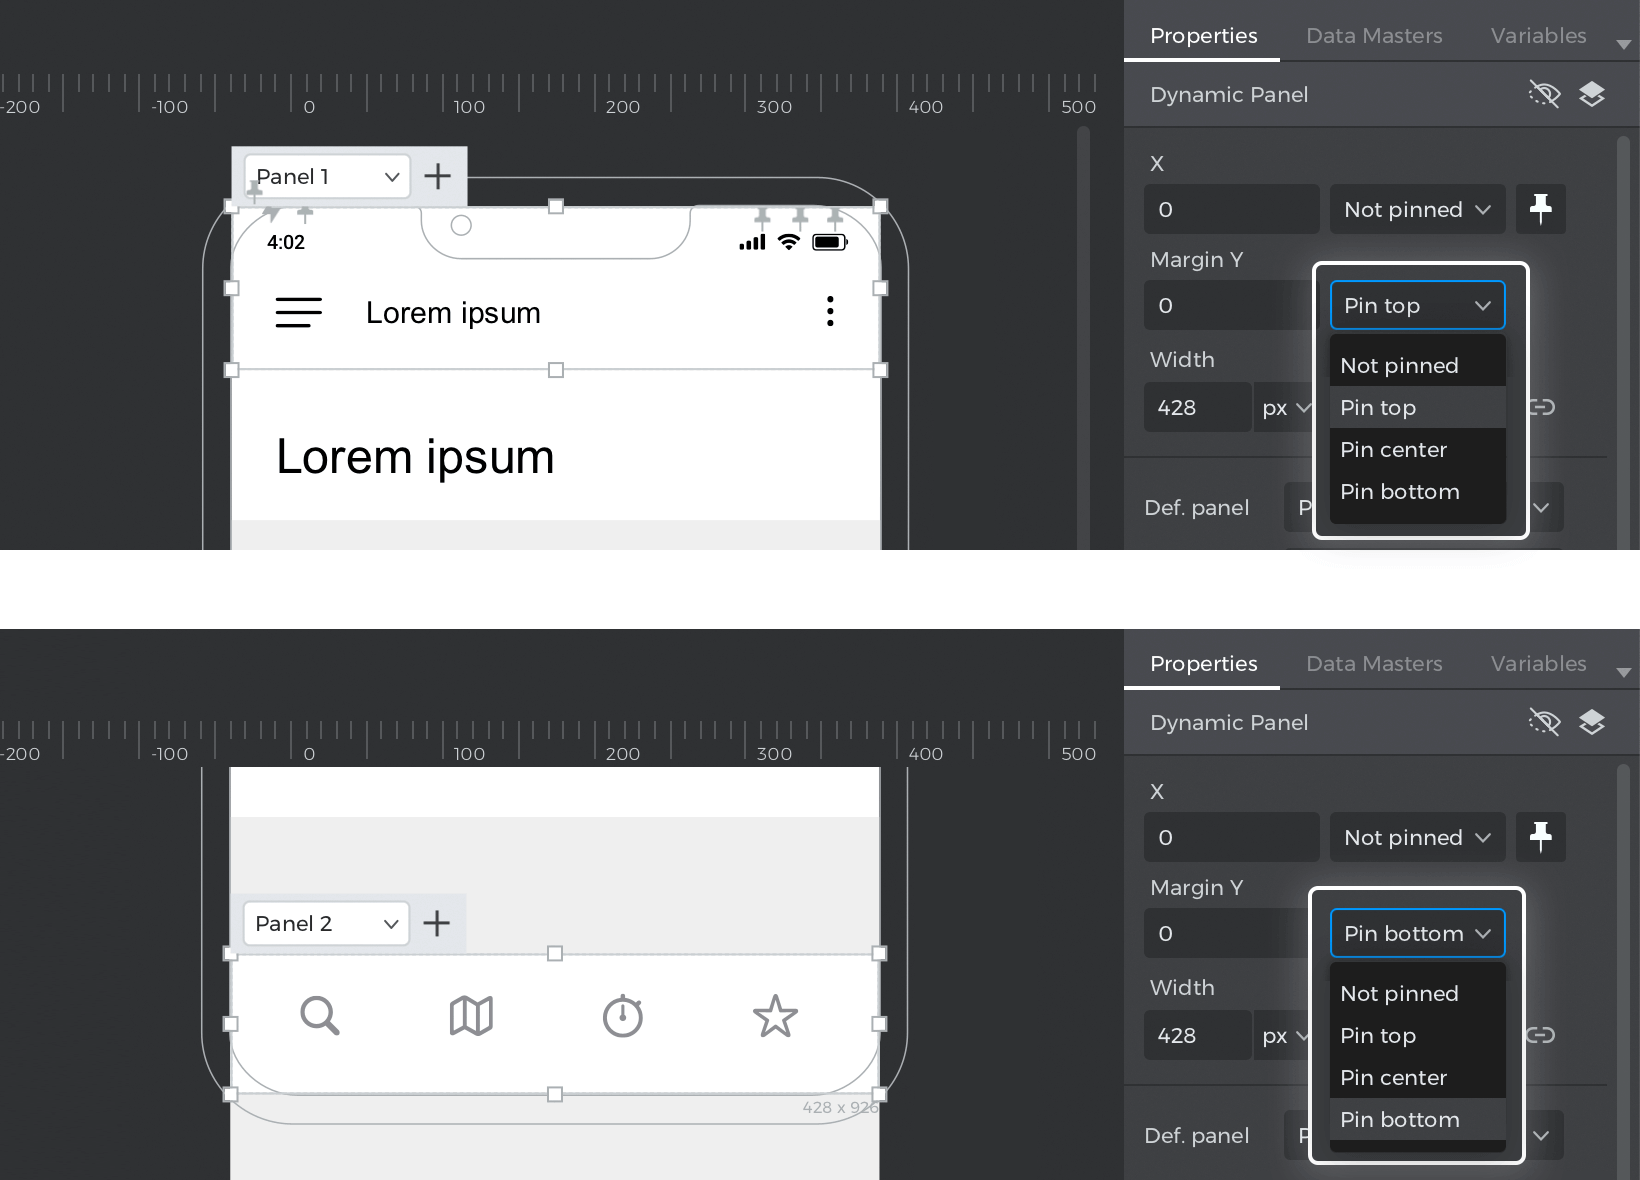 Choose 'pin top' for the header and 'pin bottom' for the footer in each dropdown